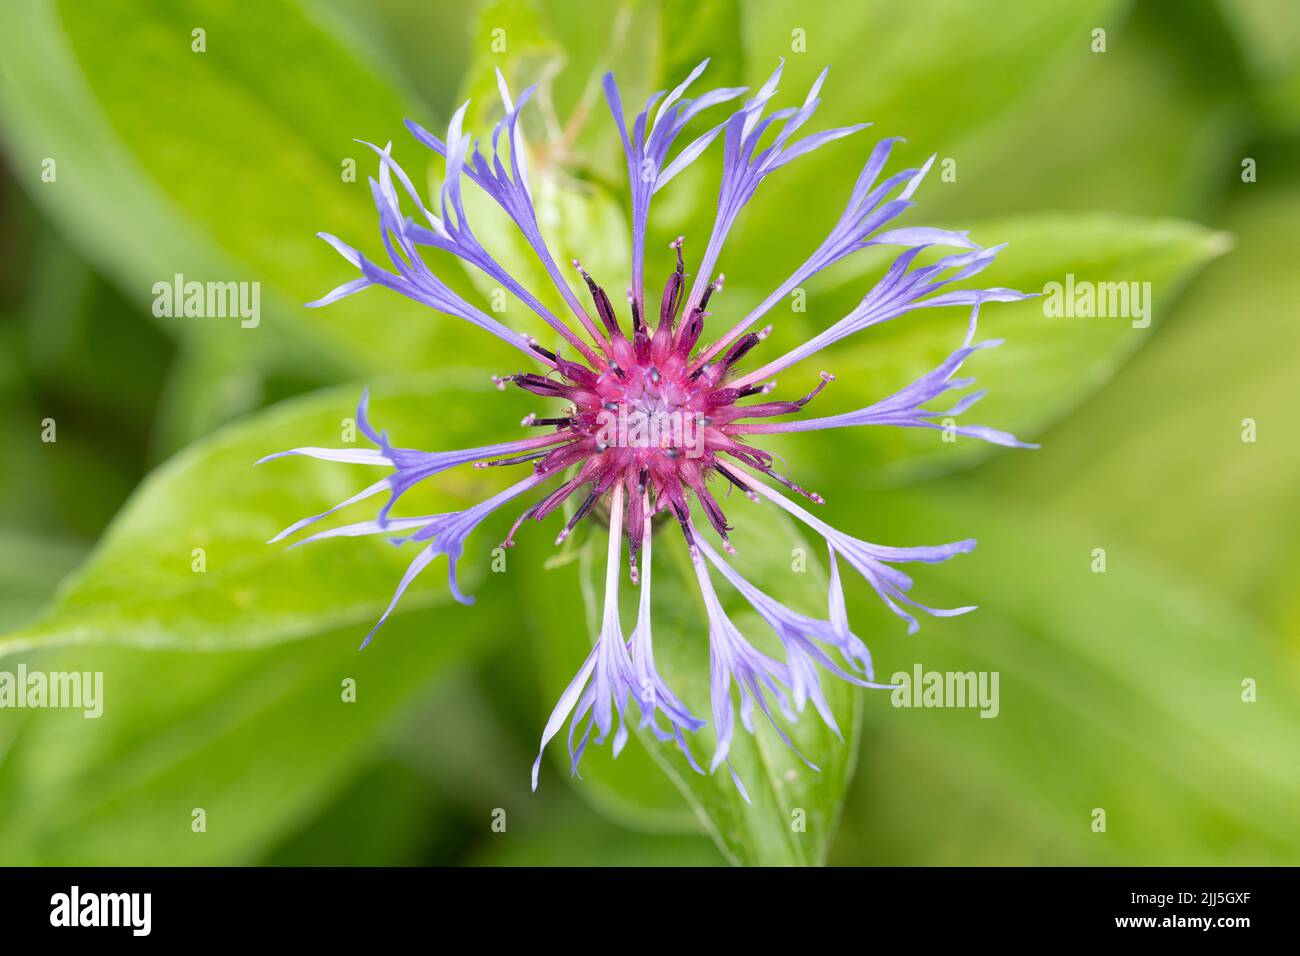 Centaurea montana (Cyanus Montanus L. Hill, commonly known as the perennial cornflower, (also mountain bluet / great blue bottle) in July, England Stock Photo